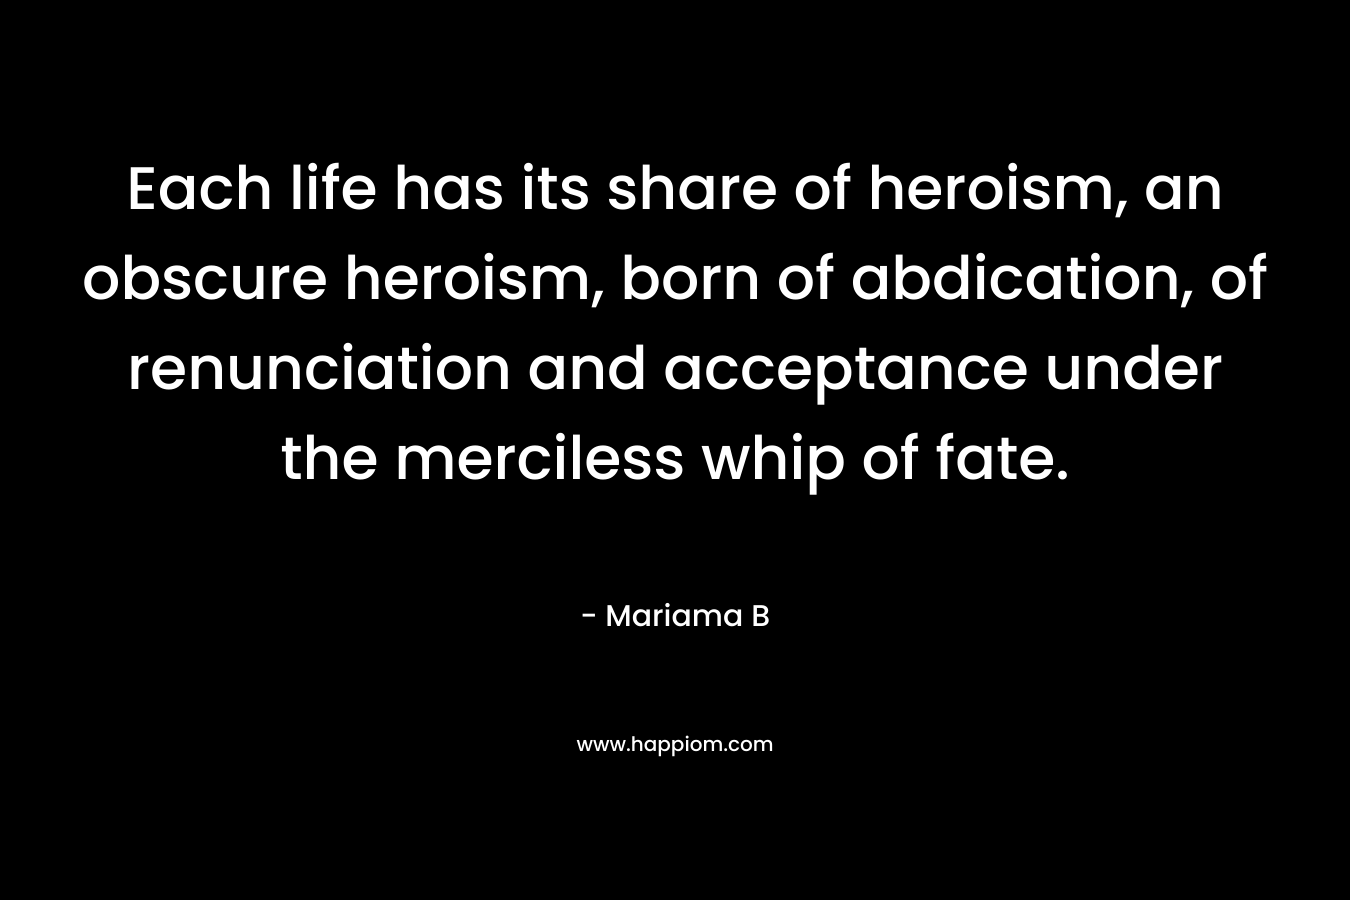 Each life has its share of heroism, an obscure heroism, born of abdication, of renunciation and acceptance under the merciless whip of fate.